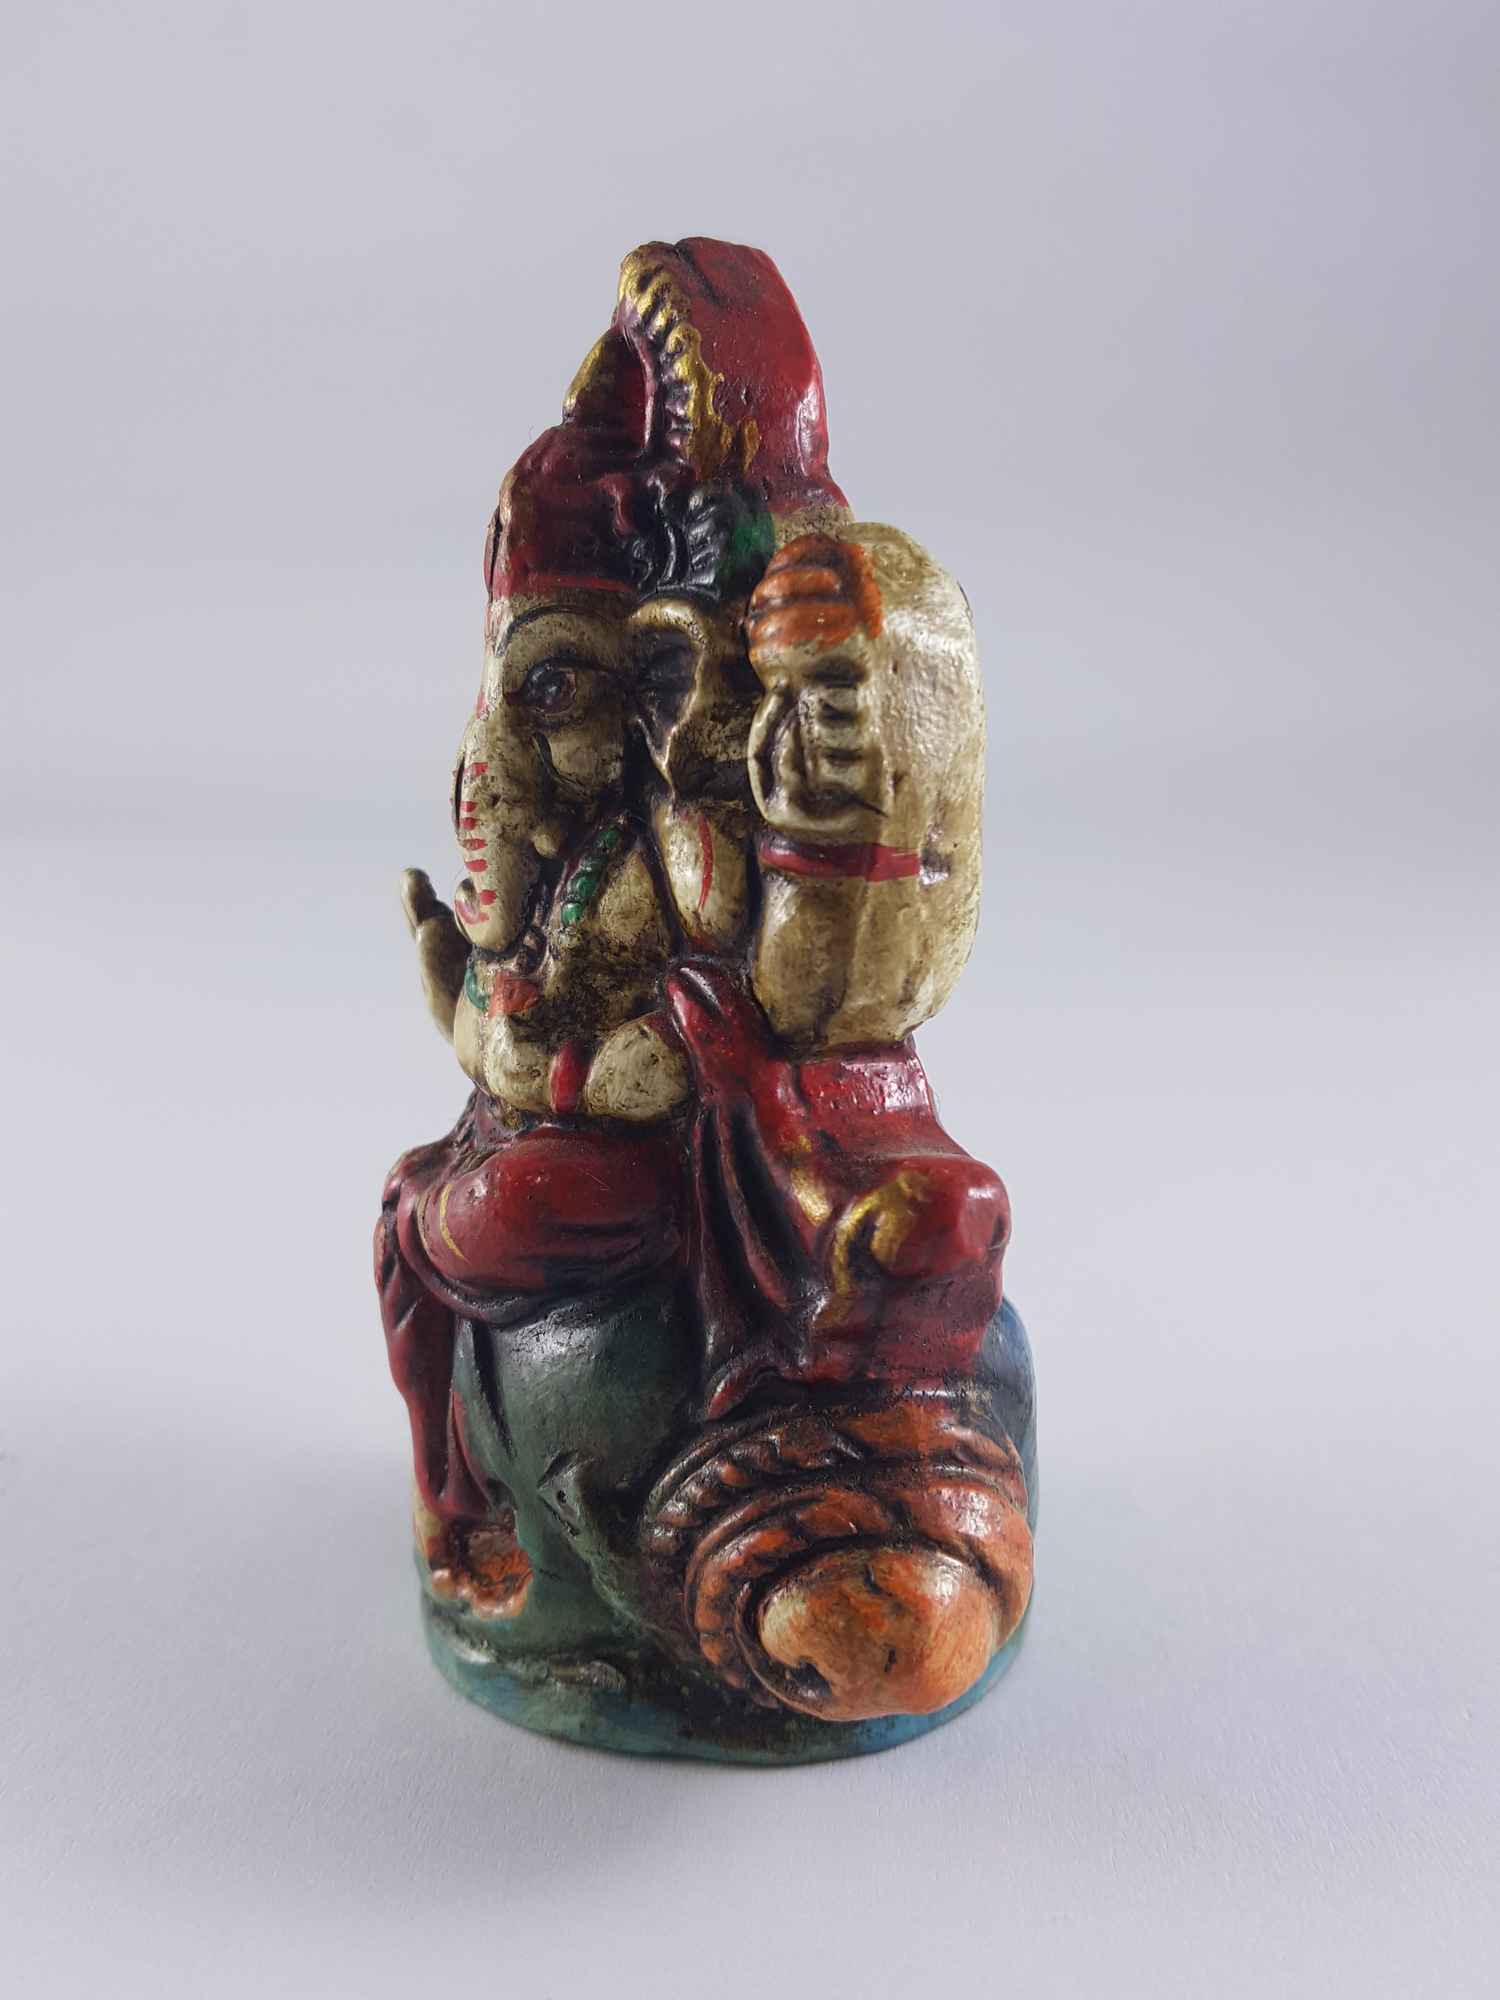 Clay Statue Of Ganesh made In Nepal, handmade, painted